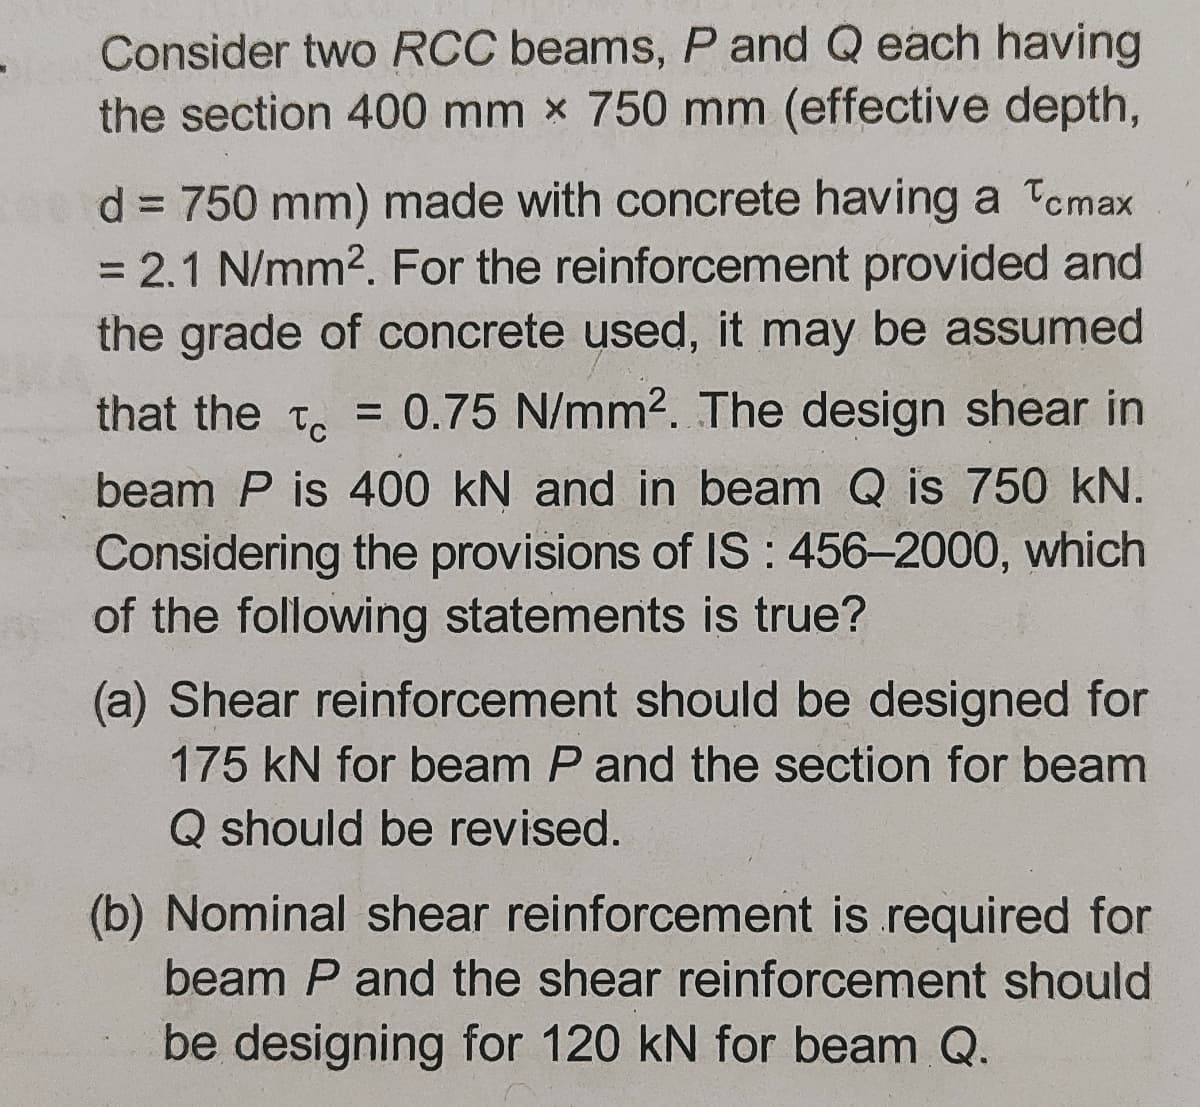 Consider two RCC beams, P and Q each having
the section 400 mm x 750 mm (effective depth,
d = 750 mm) made with concrete having a Tcmax
= 2.1 N/mm2. For the reinforcement provided and
the grade of concrete used, it may be assumed
%3D
that the t. = 0.75 N/mm2. The design shear in
beam P is 400 kN and in beam Q is 750 kN.
Considering the provisions of IS : 456-2000, which
of the following statements is true?
(a) Shear reinforcement should be designed for
175 kN for beam P and the section for beam
Q should be revised.
(b) Nominal shear reinforcement is required for
beam P and the shear reinforcement should
be designing for 120 kN for beam Q.
